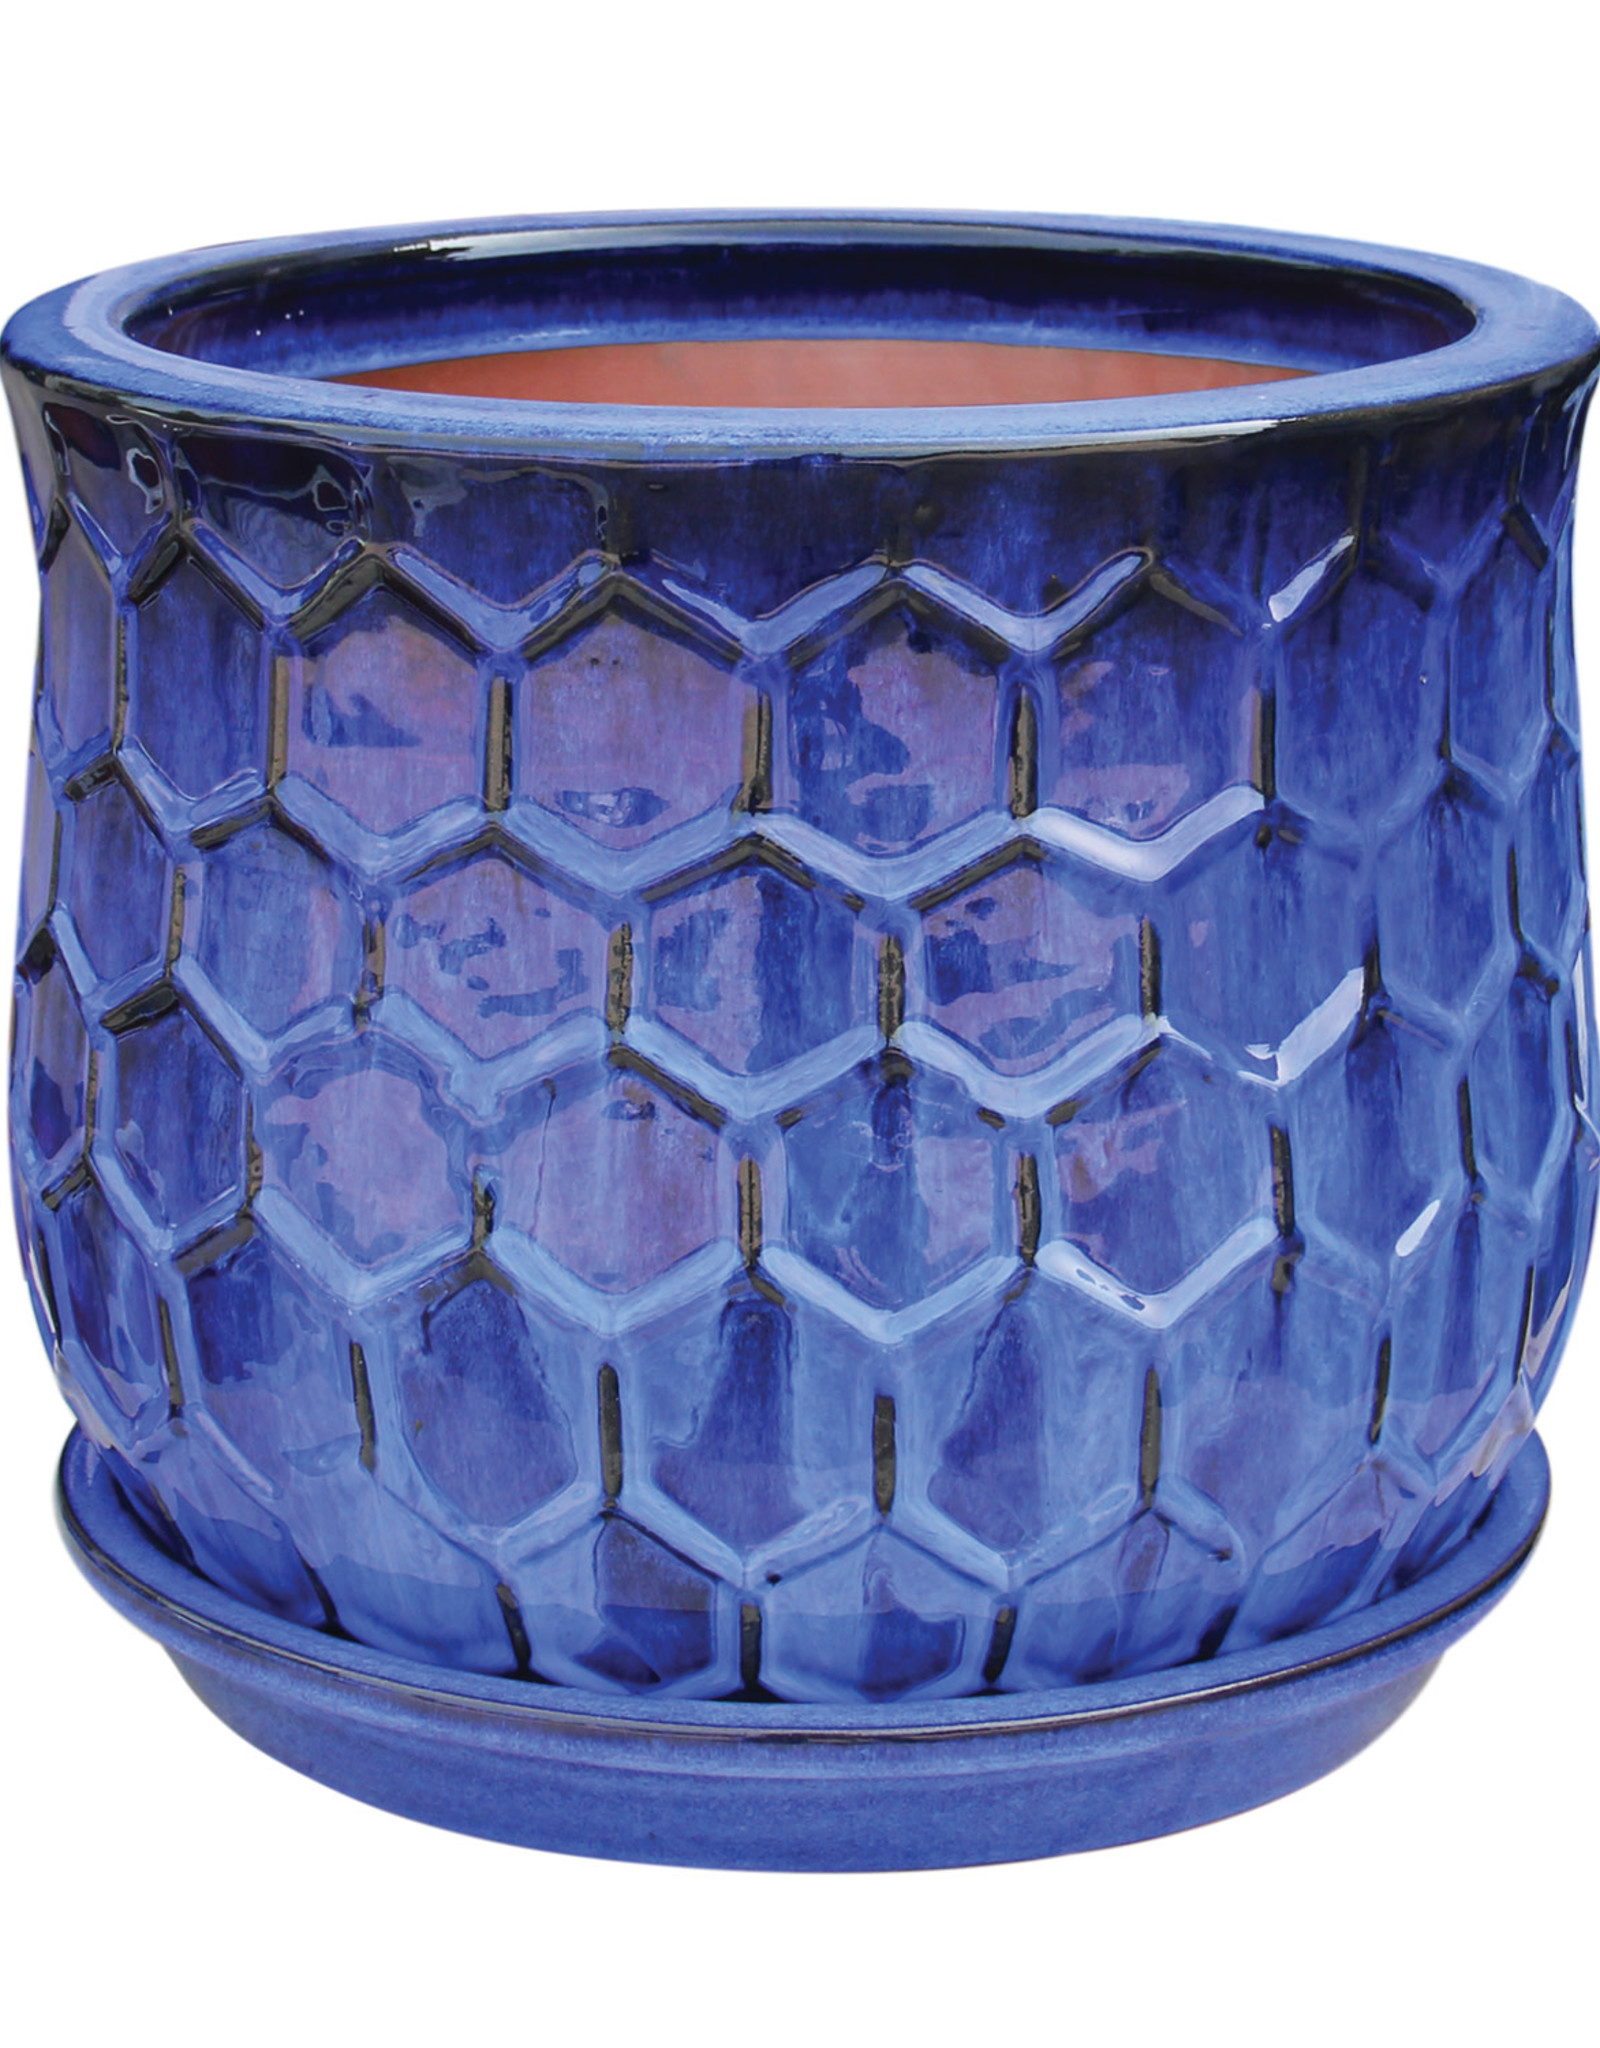 Honeycomb Bell Planter With Attached Saucer 8.25" x 6.75" Blue